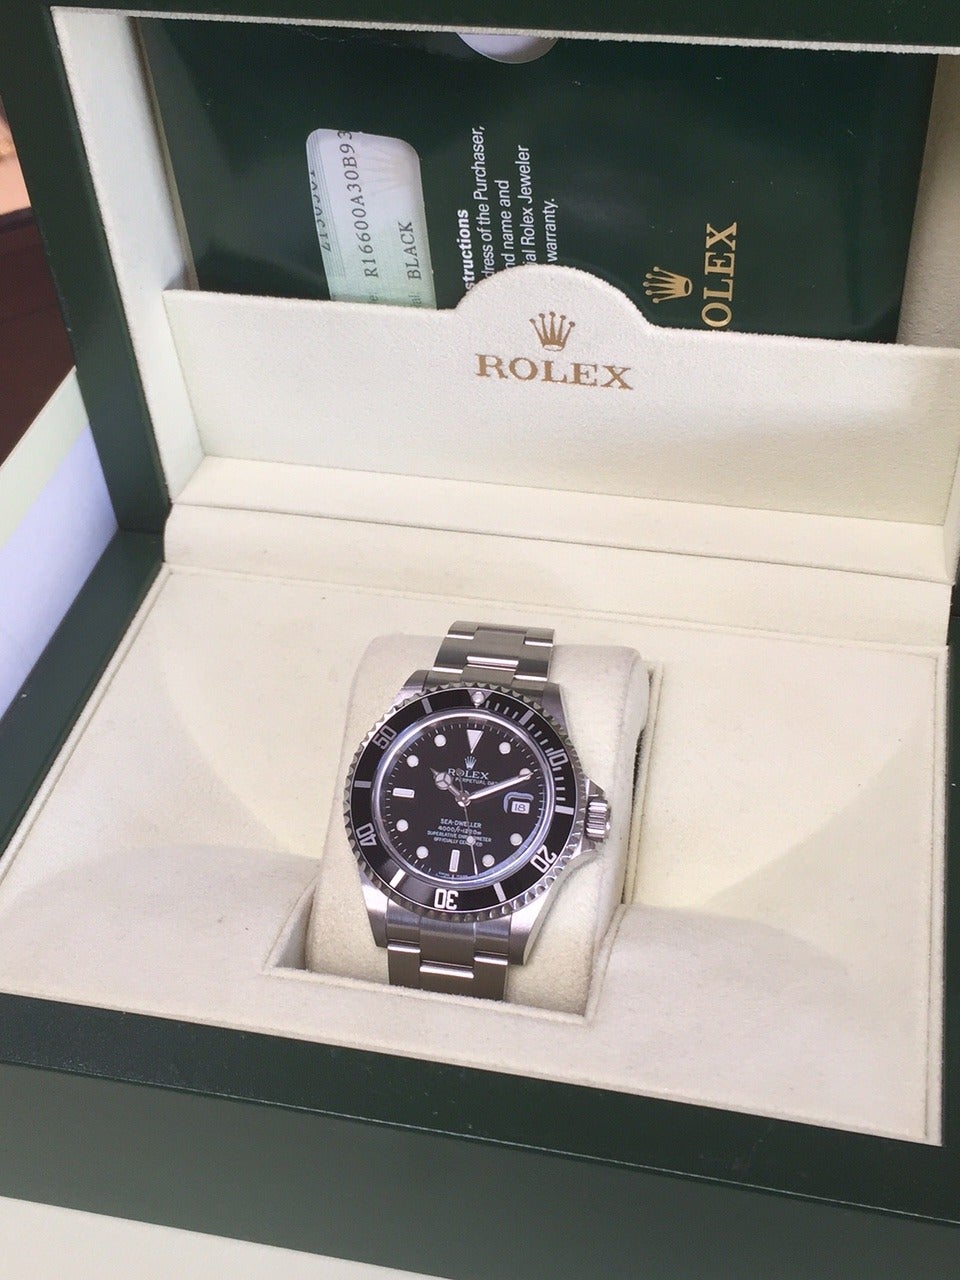 Rolex stainless steel Sea-Dweller wristwatch, Ref. 16600,  2006. This watch features a helium escape valve, a black dial with luminescent hour markers, automatic movement with date, scratch-resistant sapphire crystal, waterproof screw-down crown.